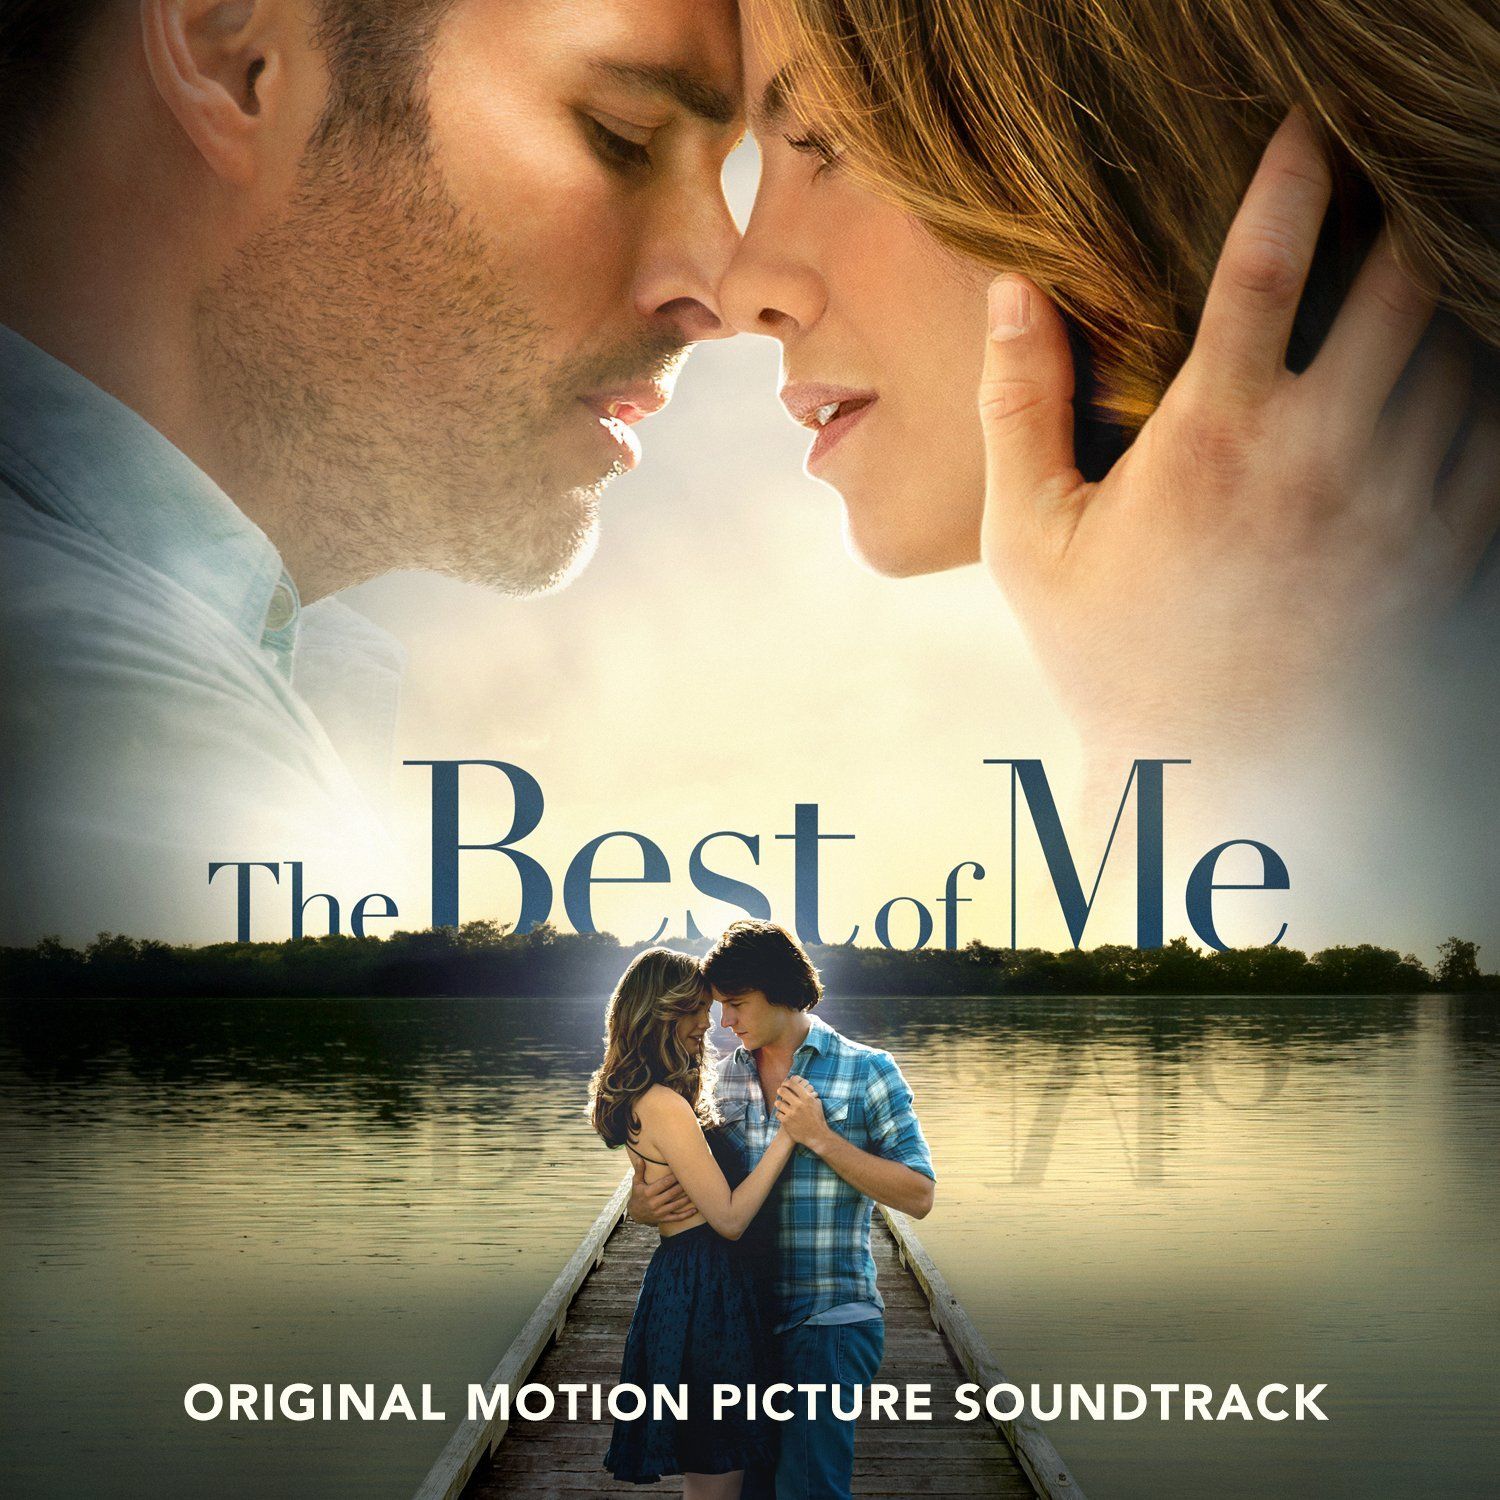 THE BEST OF ME SOUNDTRACK ARRIVES IN STORES TOMORROW